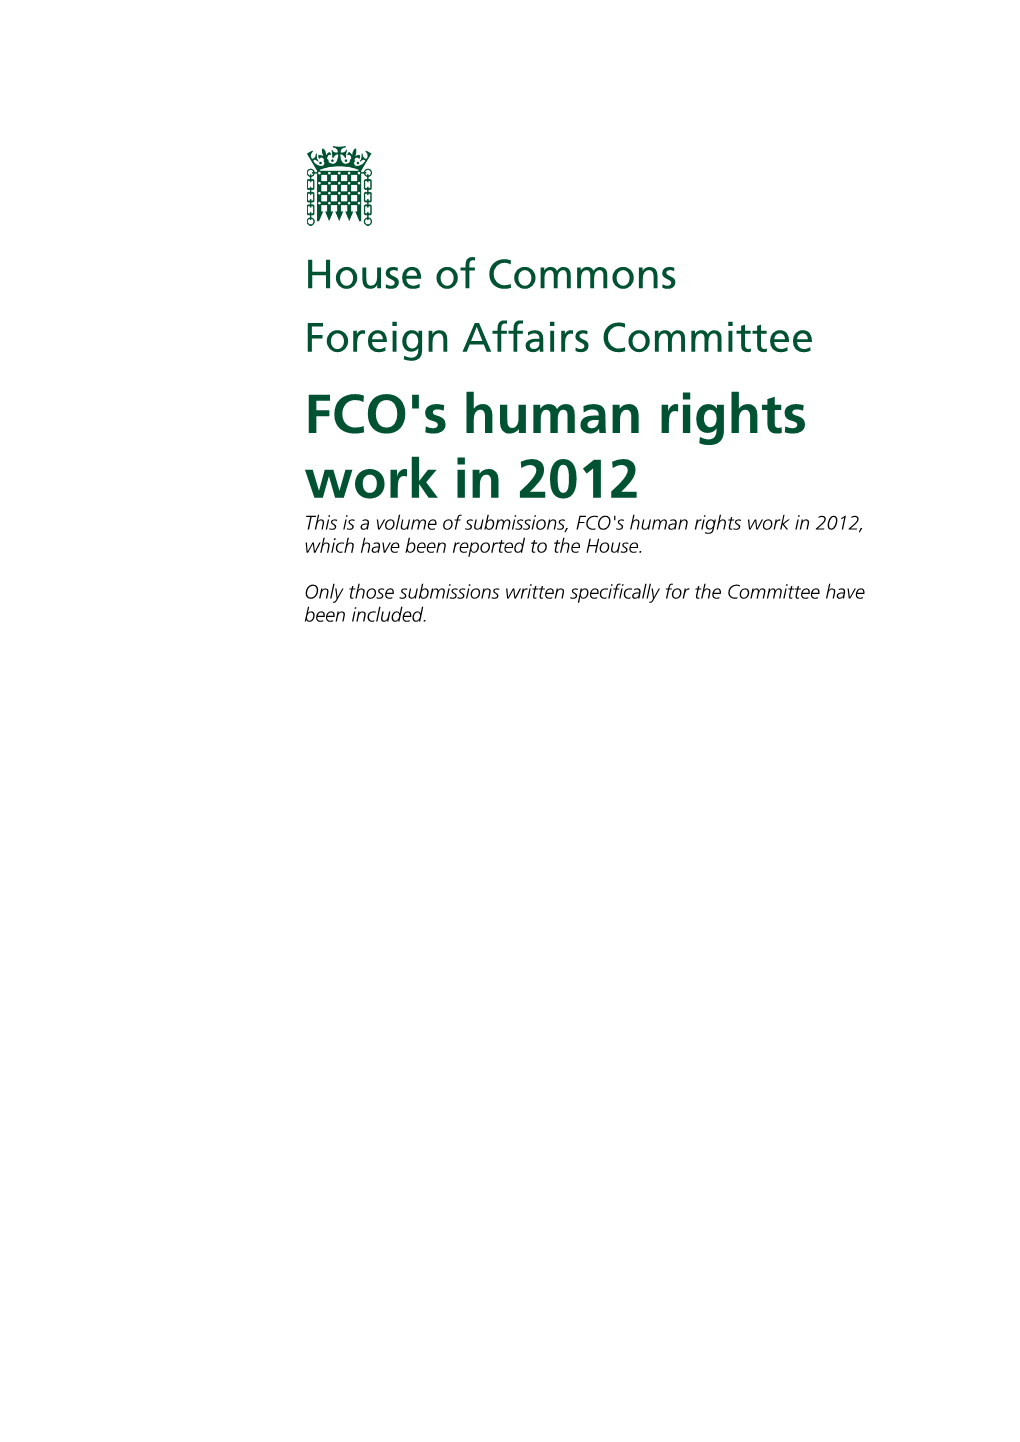 FCO's Human Rights Work in 2012 This Is a Volume of Submissions, FCO's Human Rights Work in 2012, Which Have Been Reported to the House